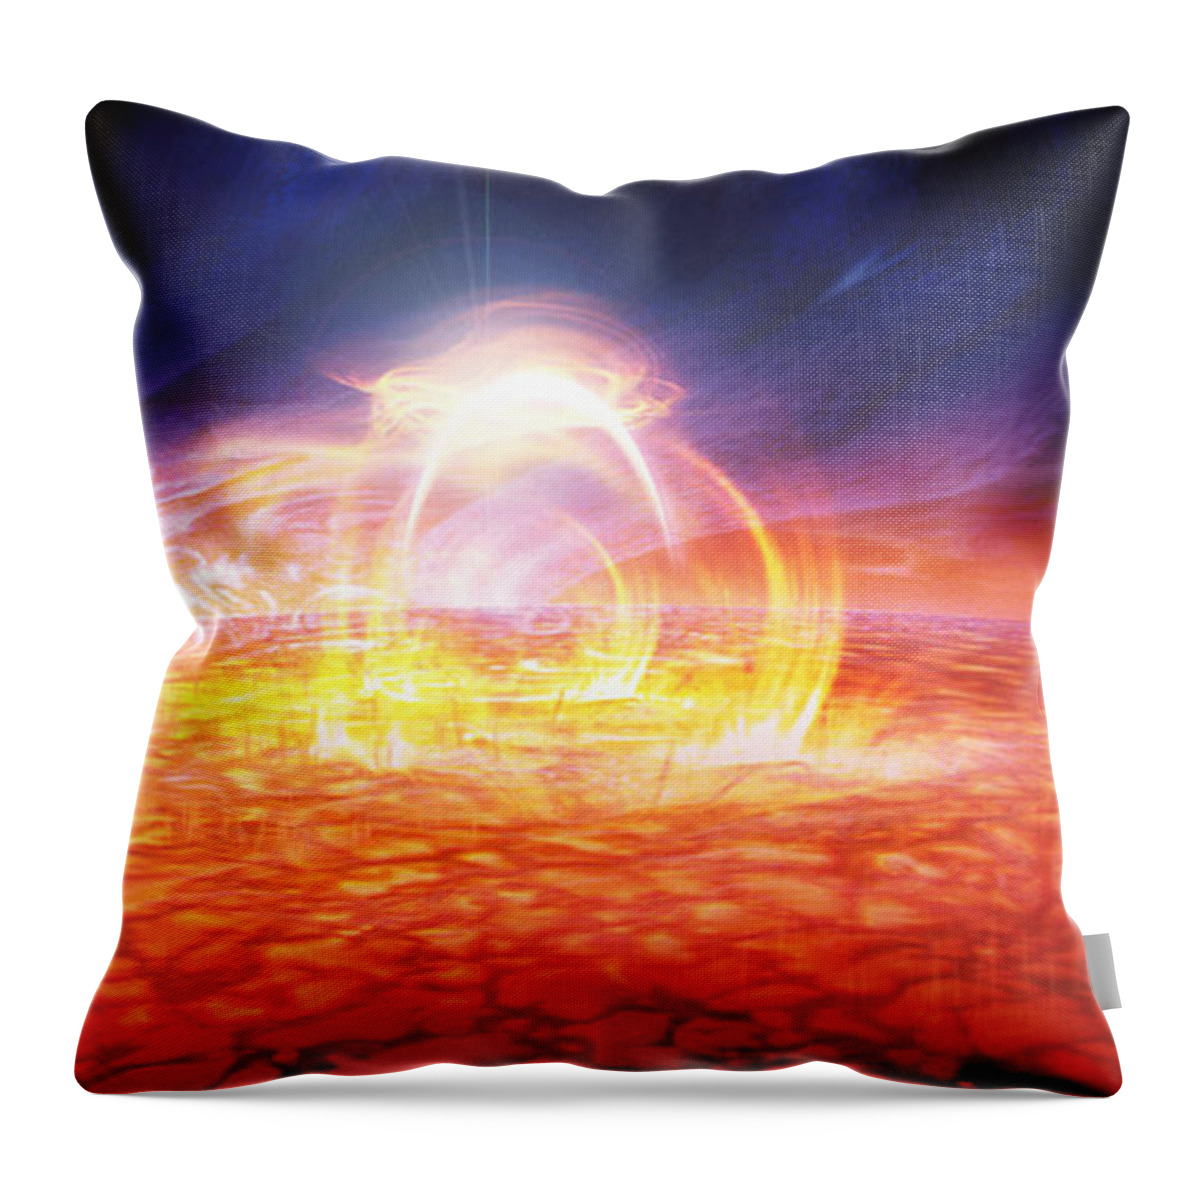 Space Throw Pillow featuring the painting Solar Flare by Don Dixon